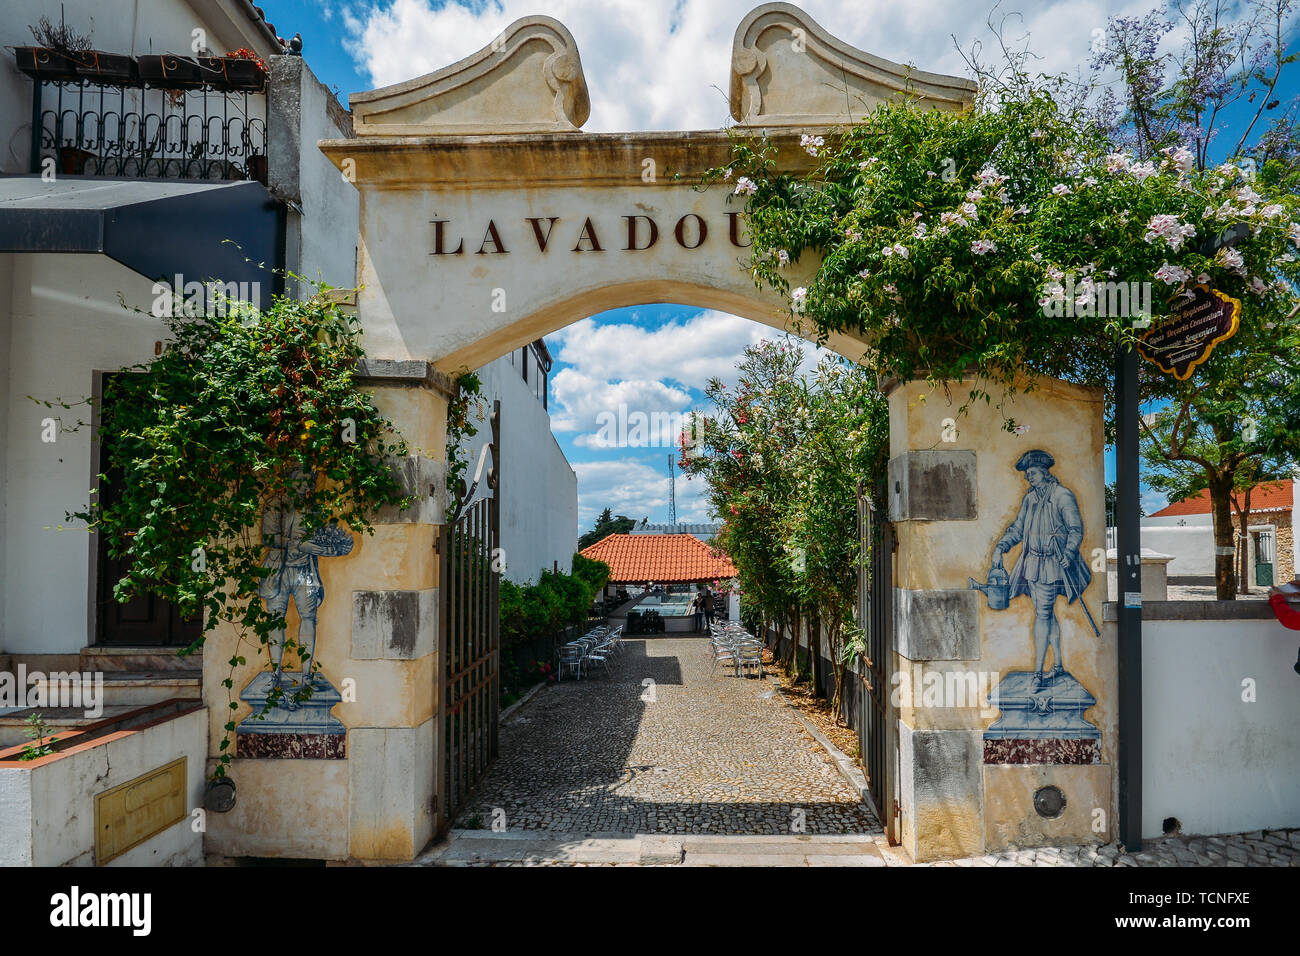 Azeitao, Portugal - June 7, 2019: Entrance to a traditional washing basin area converted into a restaurant at the charming village of Azeitao Portugal Stock Photo